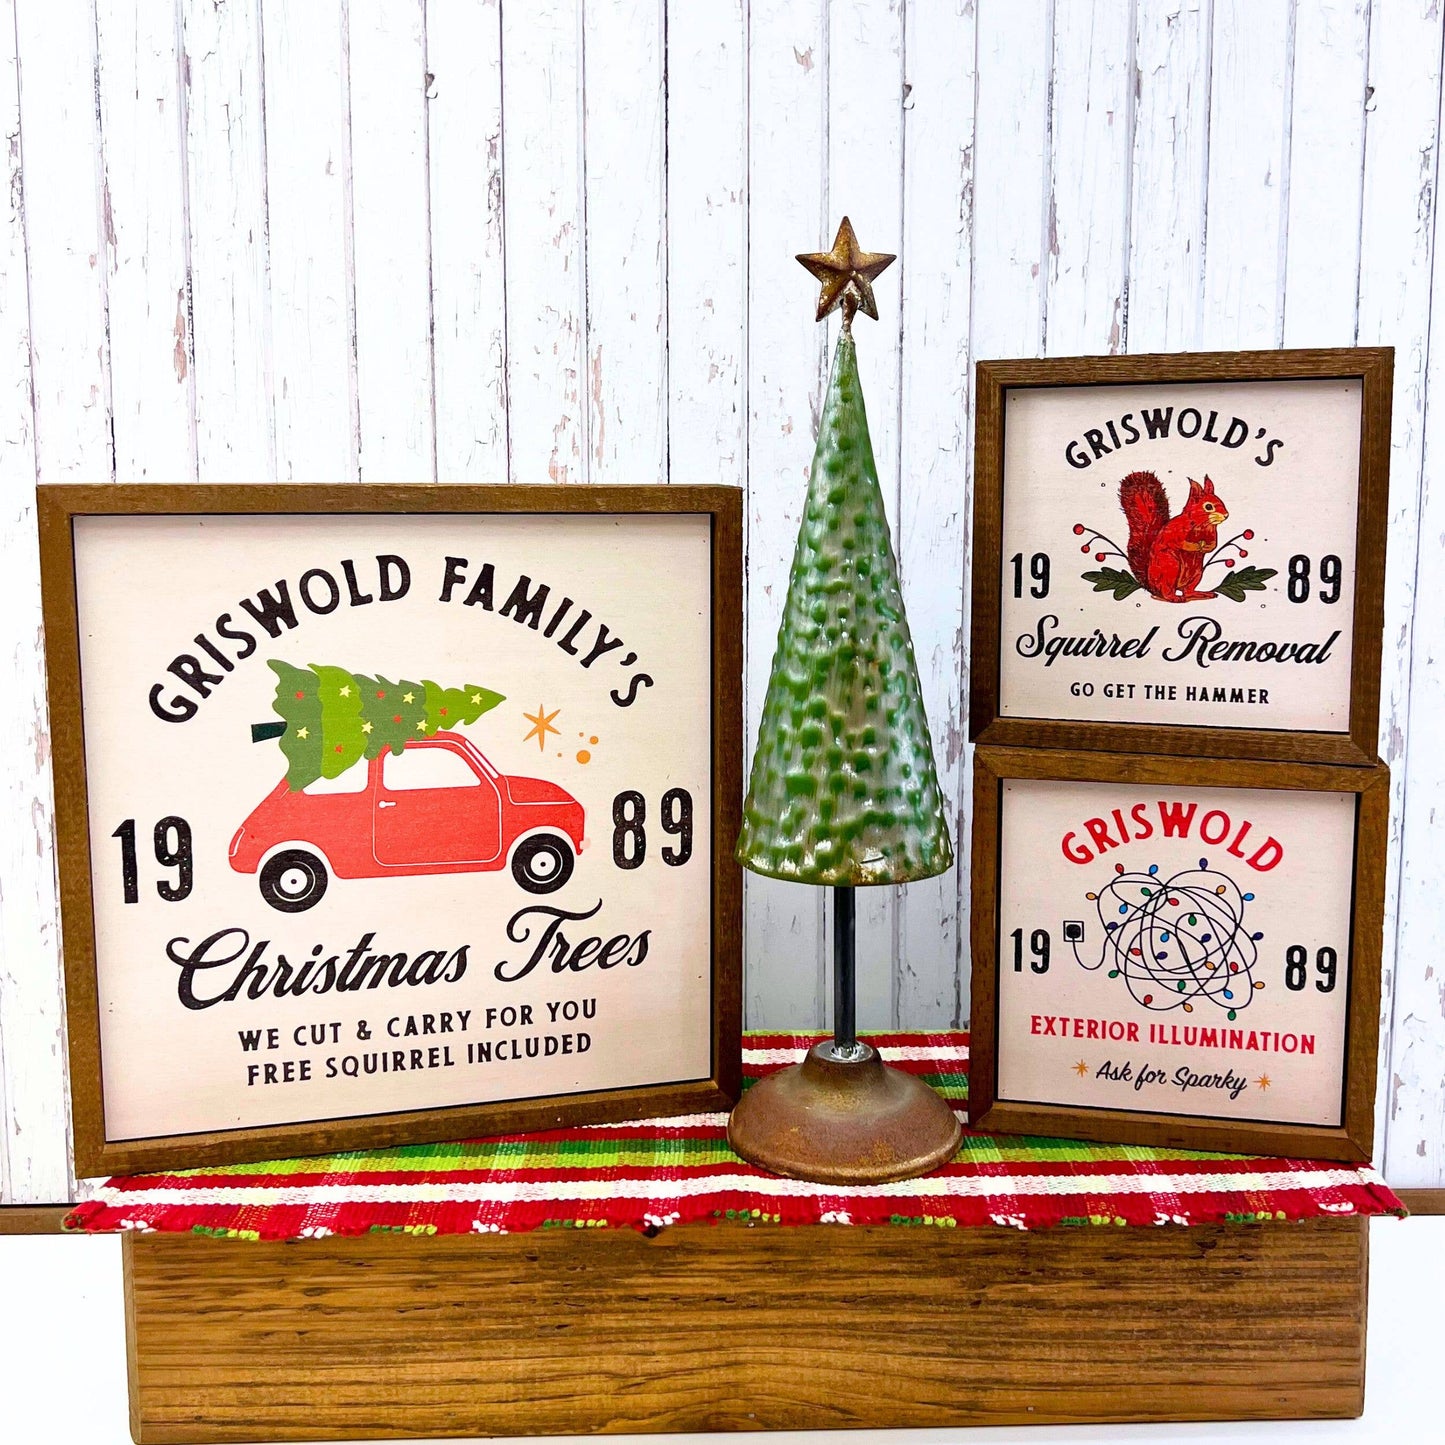 Griswold Exterior Illumination Holiday Sign Christmas Decor